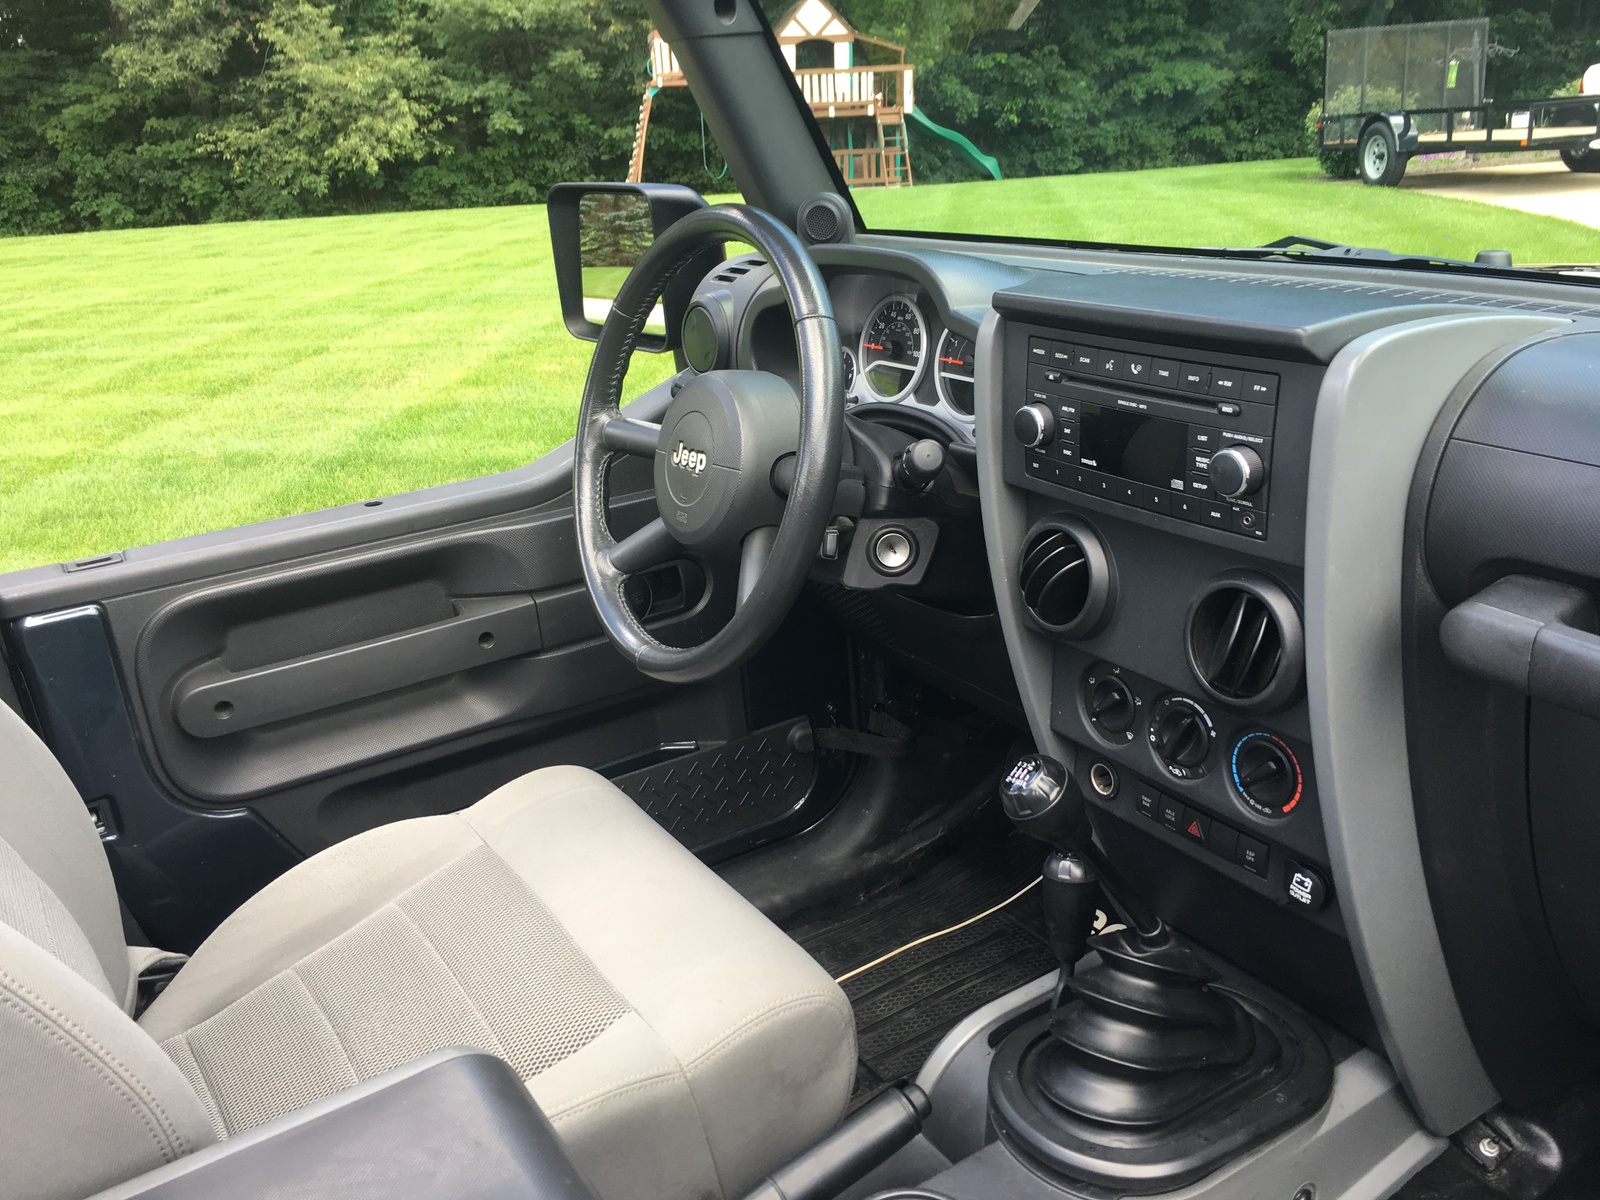 2008 Jeep Wrangler: Prices, Reviews & Pictures - CarGurus